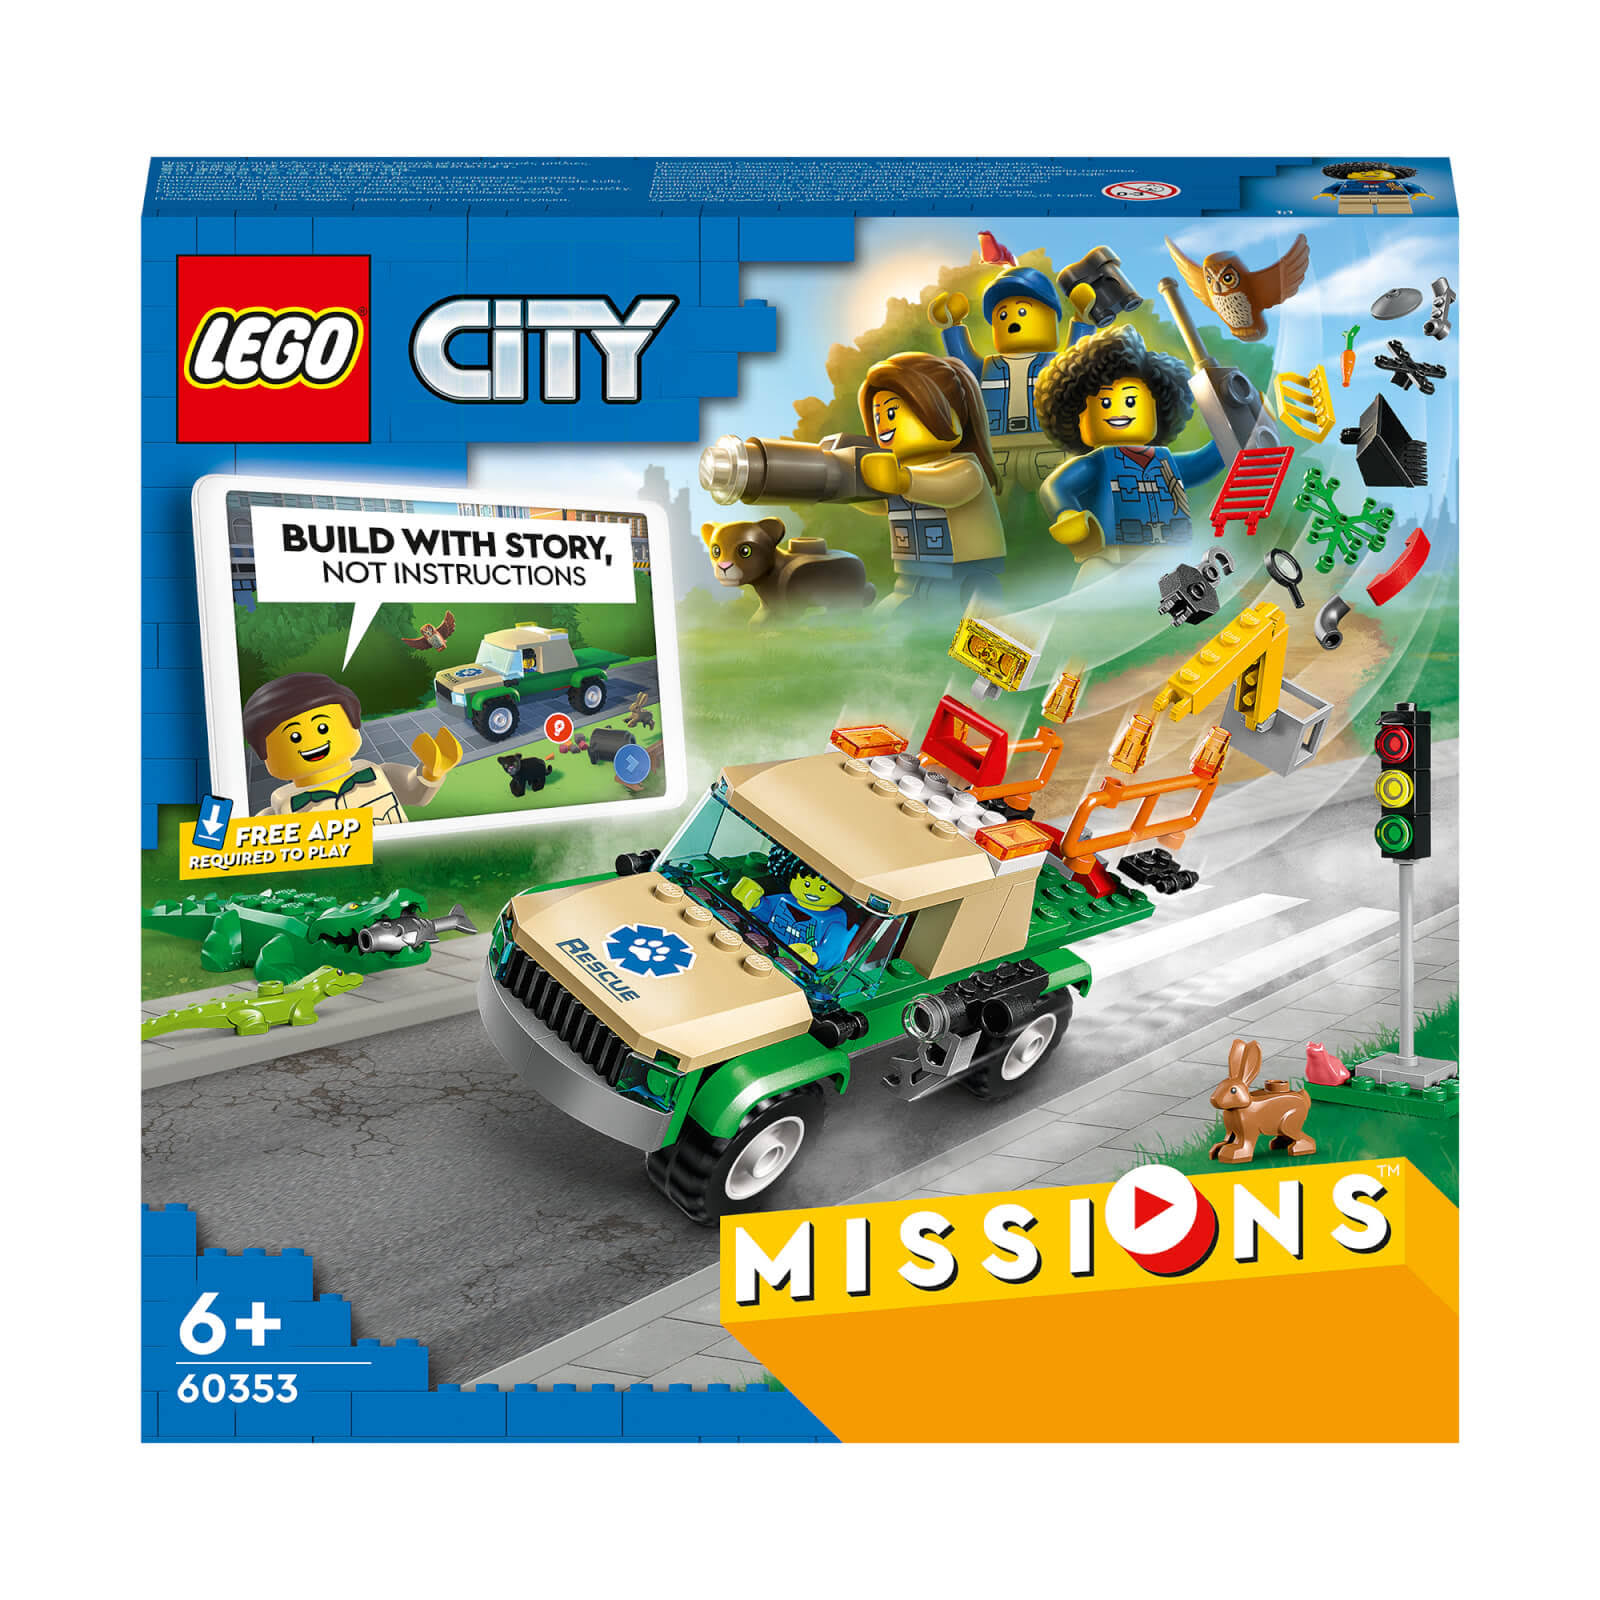 LEGO 60353 City Wild Animal Rescue Missions Playset